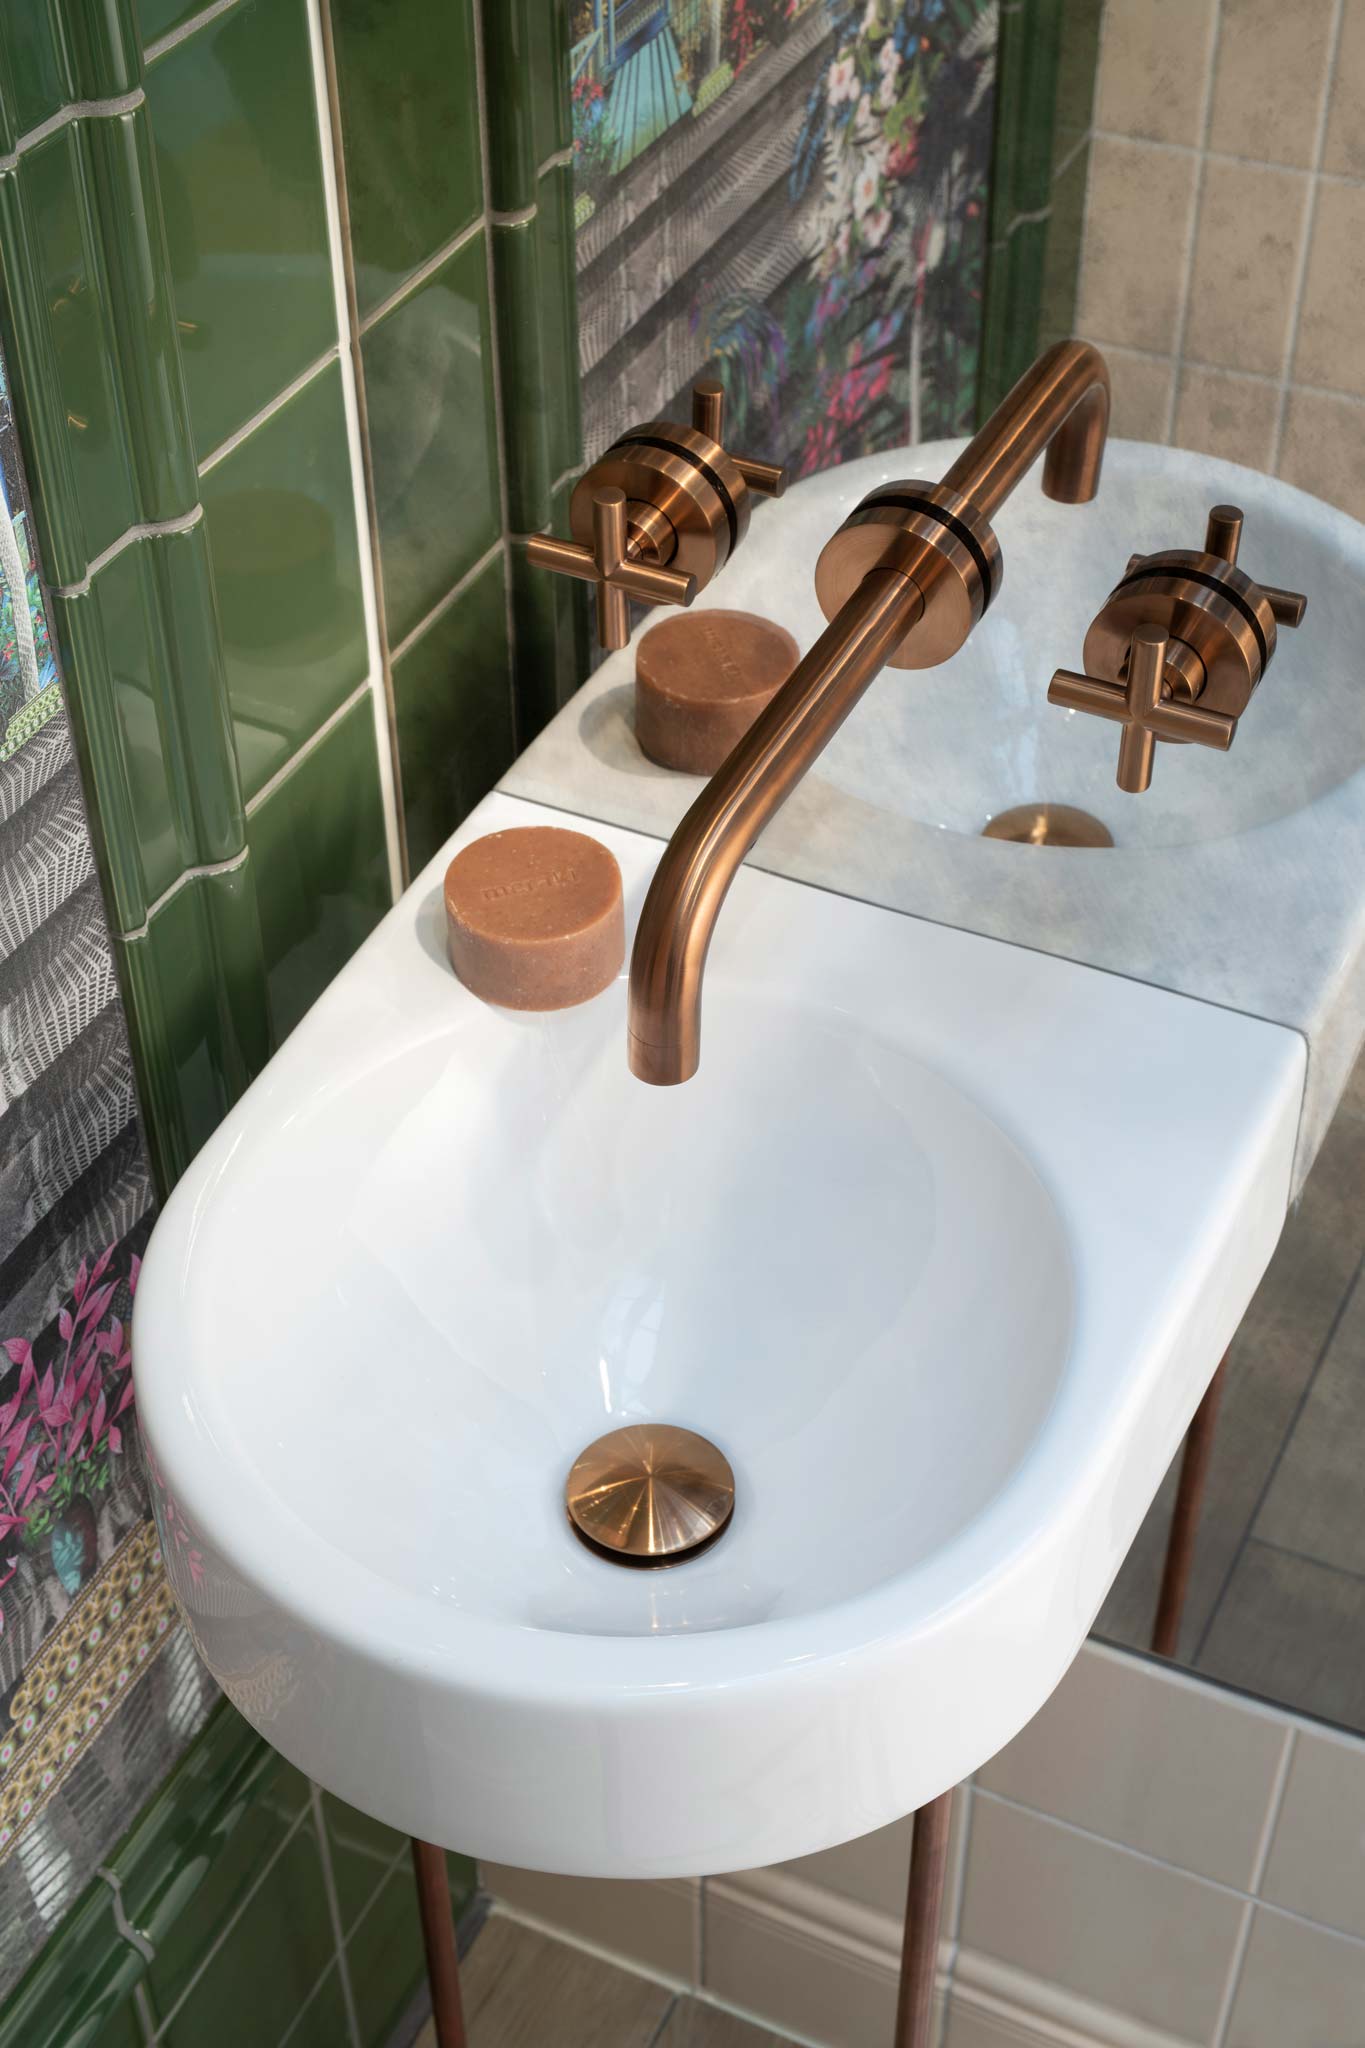 Location photography of bathroom brassware and basin display